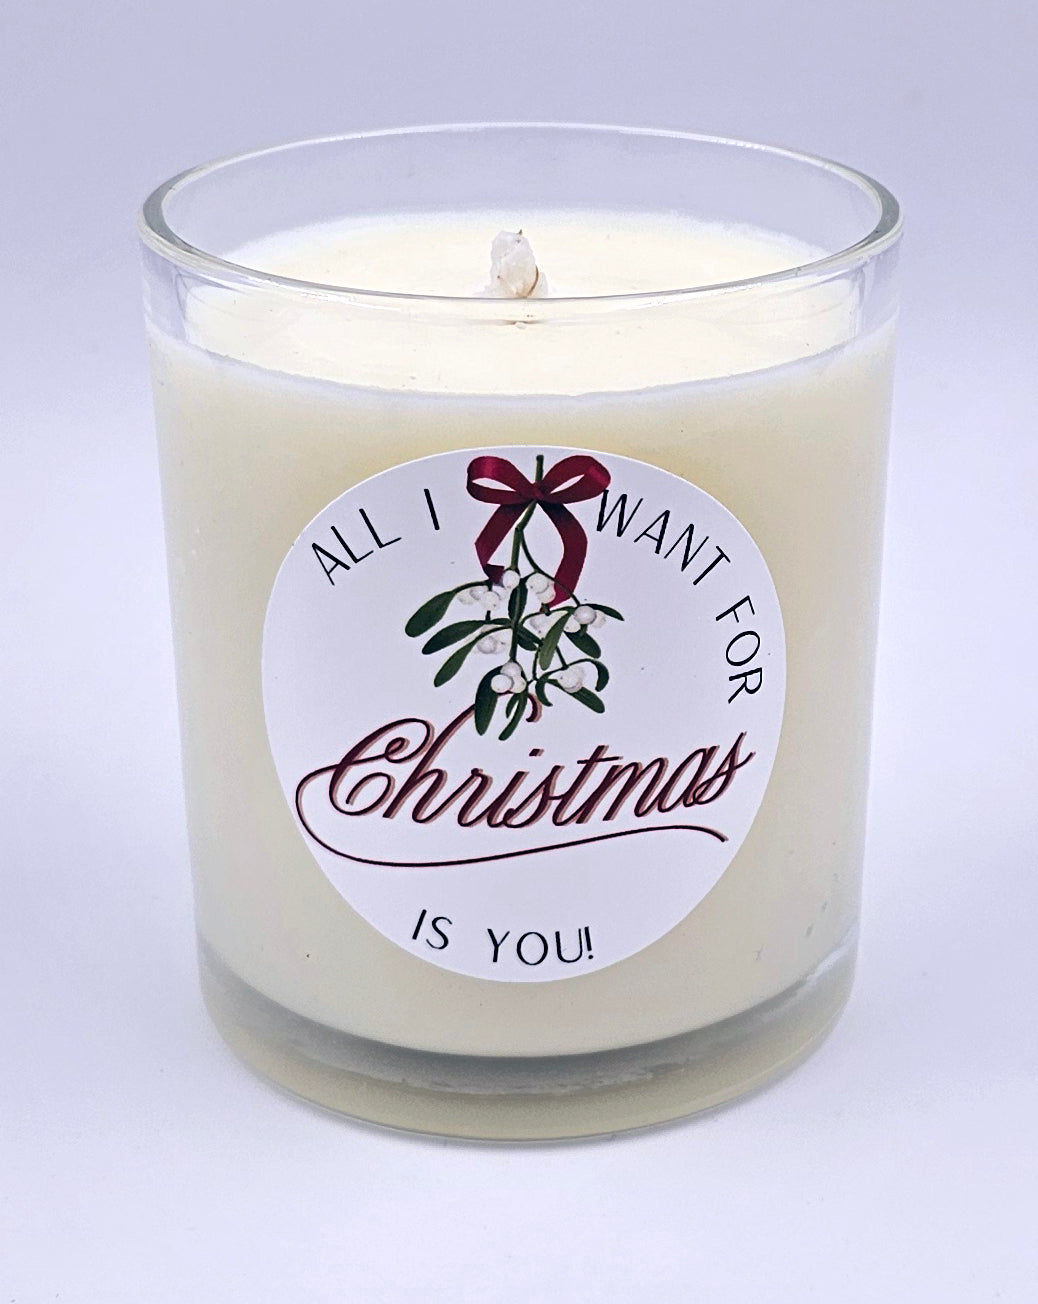 All I Want For Christmas - Luxury Clear Glass Jar - Real Wood Lid - 10oz - Scented Candle - ECO Cotton Wick